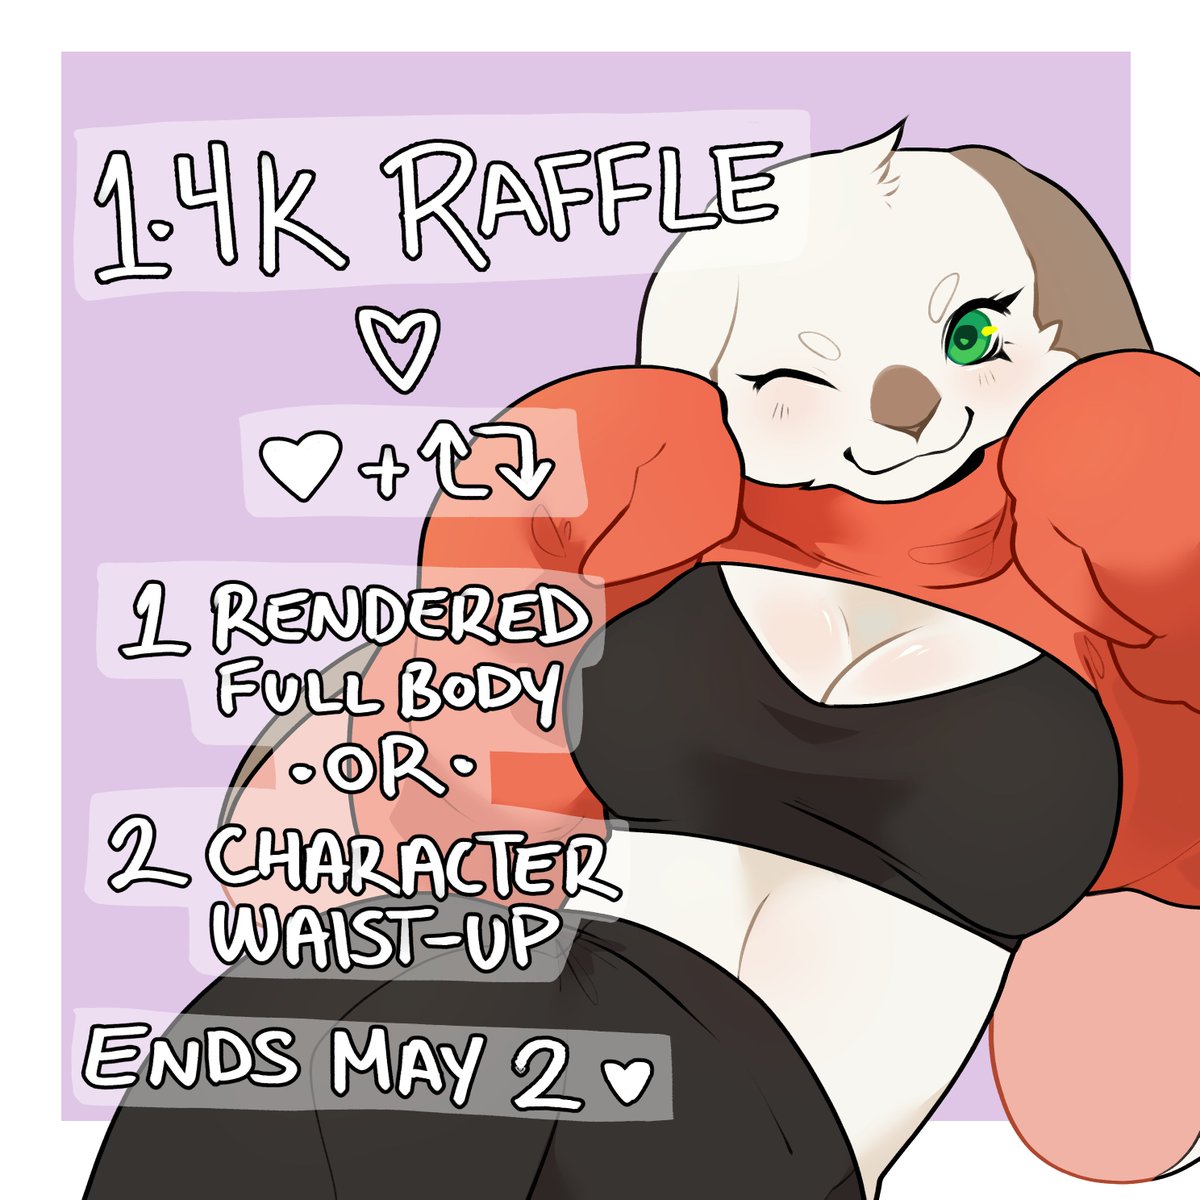 AH I finally got around to organizing this ;;;

Ends May 2nd -- 2 winners! 
 
Thank you for your support 💕💕